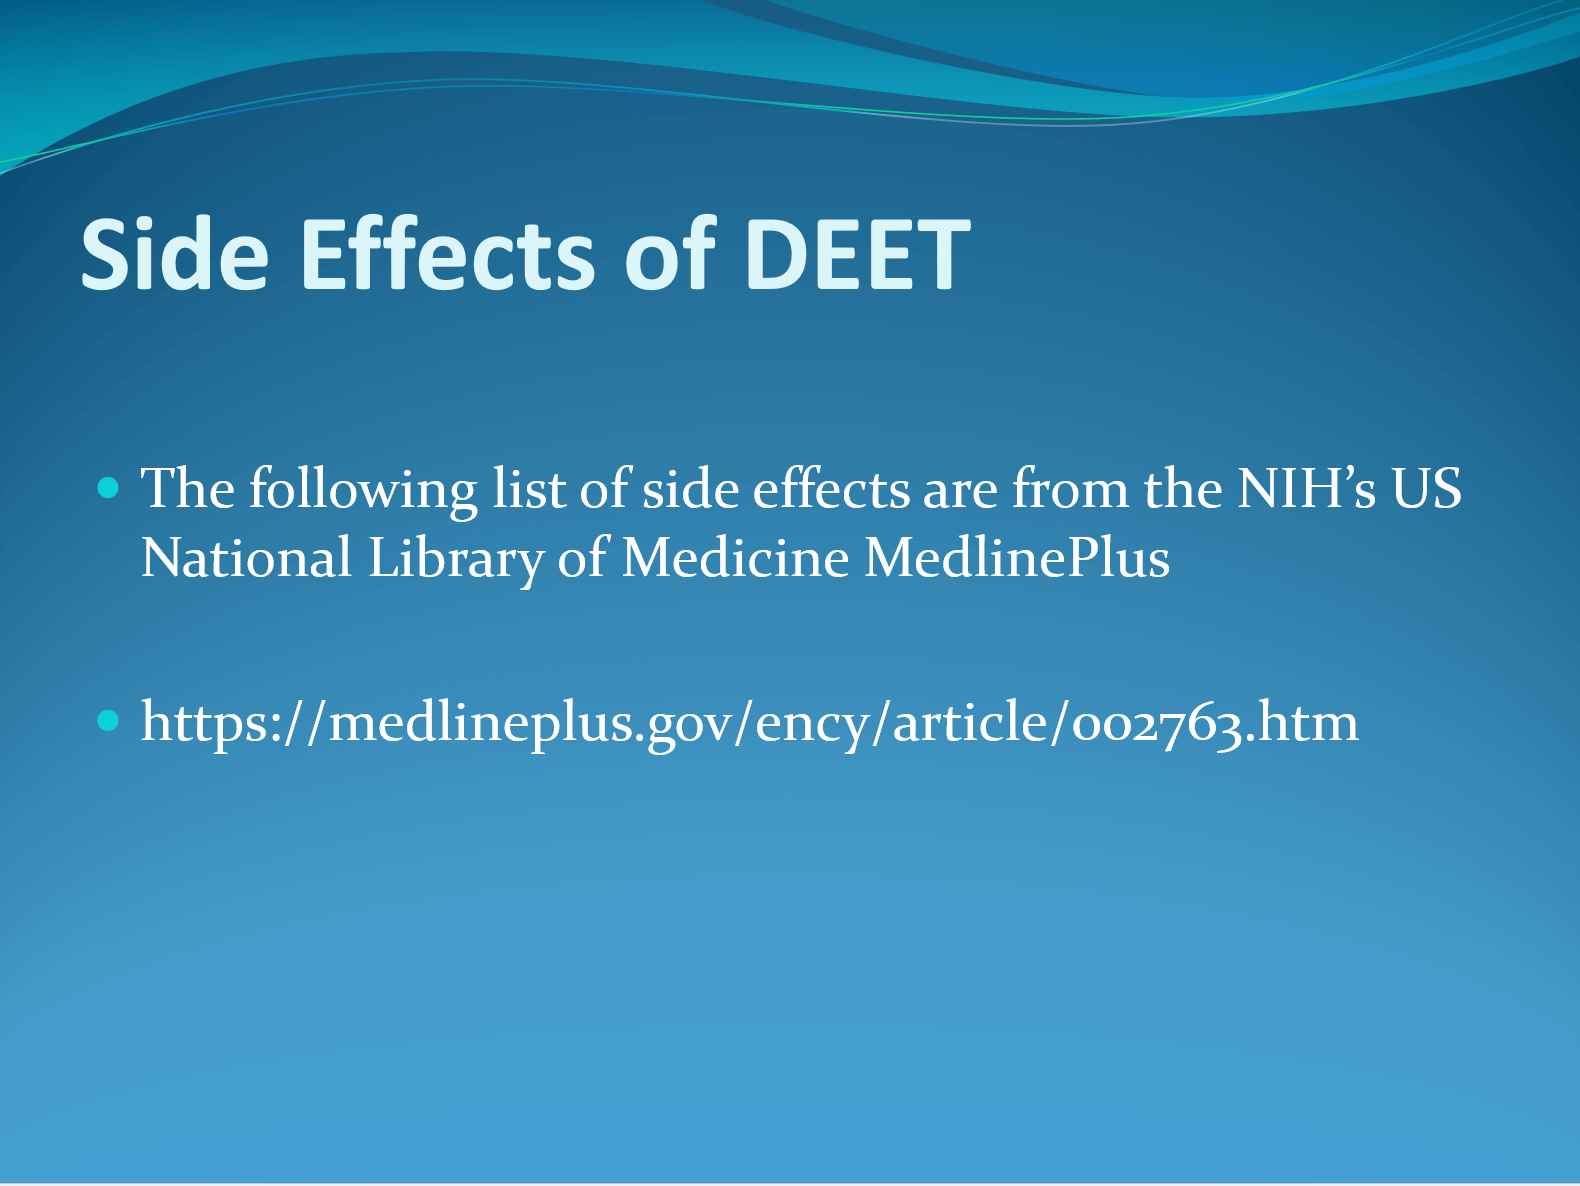 Powerpoint slide from Bilal Qizilbash's innovate ms talk 2016 showcasing side effects of DEET in text.